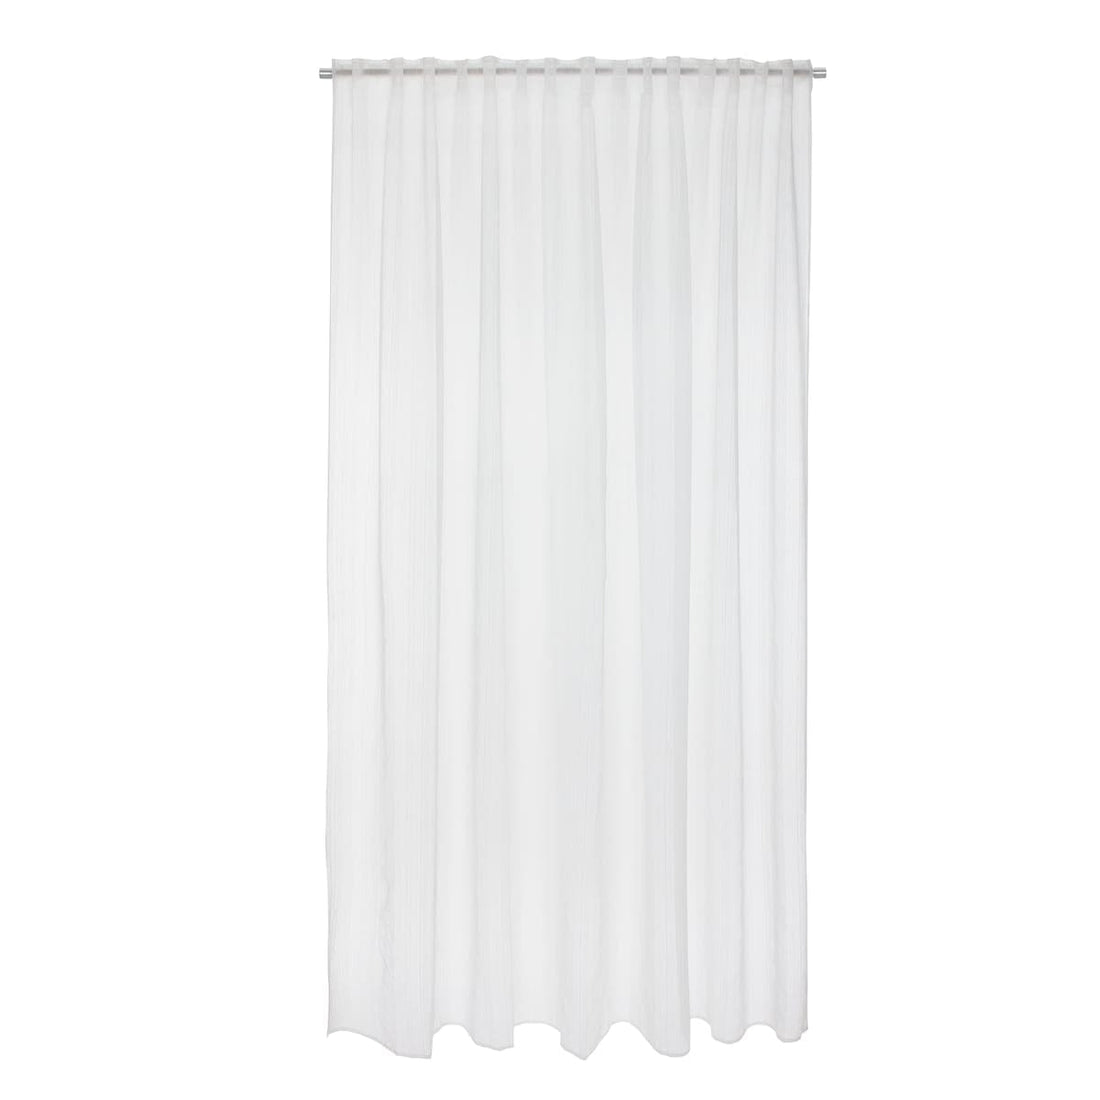 LOLITA WHITE FILTER CURTAIN 300X280 CM WEBBING AND CONCEALED LOOP - best price from Maltashopper.com BR480009480